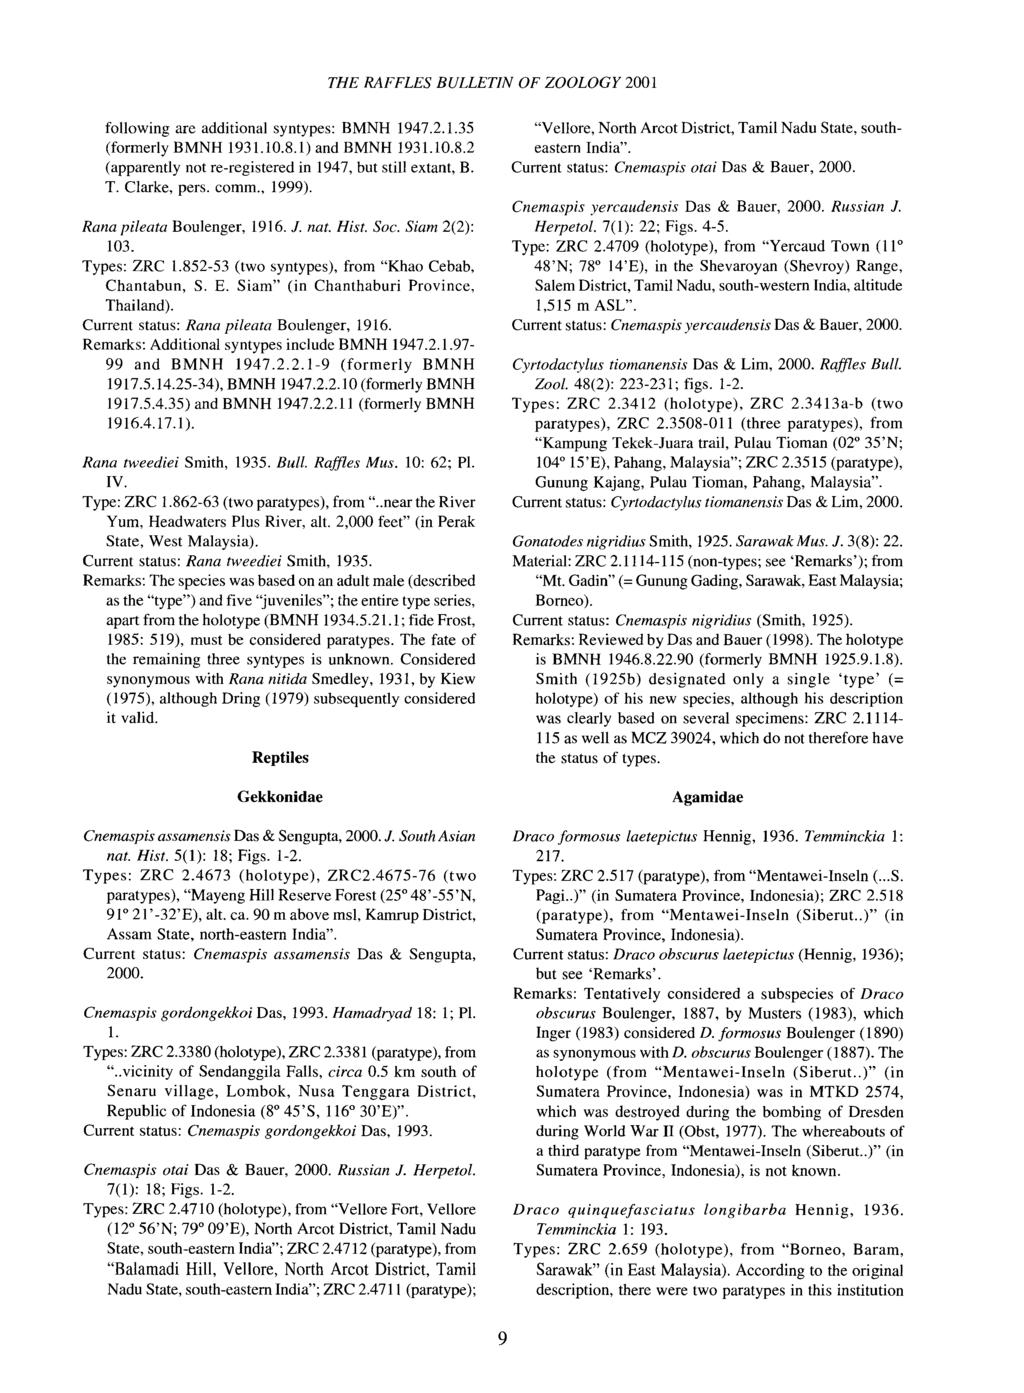 THE RAFFLES BULLETIN OF ZOOLOGY 2001 following are additional syntypes: BMNH 1947.2.1.35 (formerly BMNH 1931.10.8.1) and BMNH 1931.10.8.2 (apparently not re-registered in 1947, but still extant, B. T.